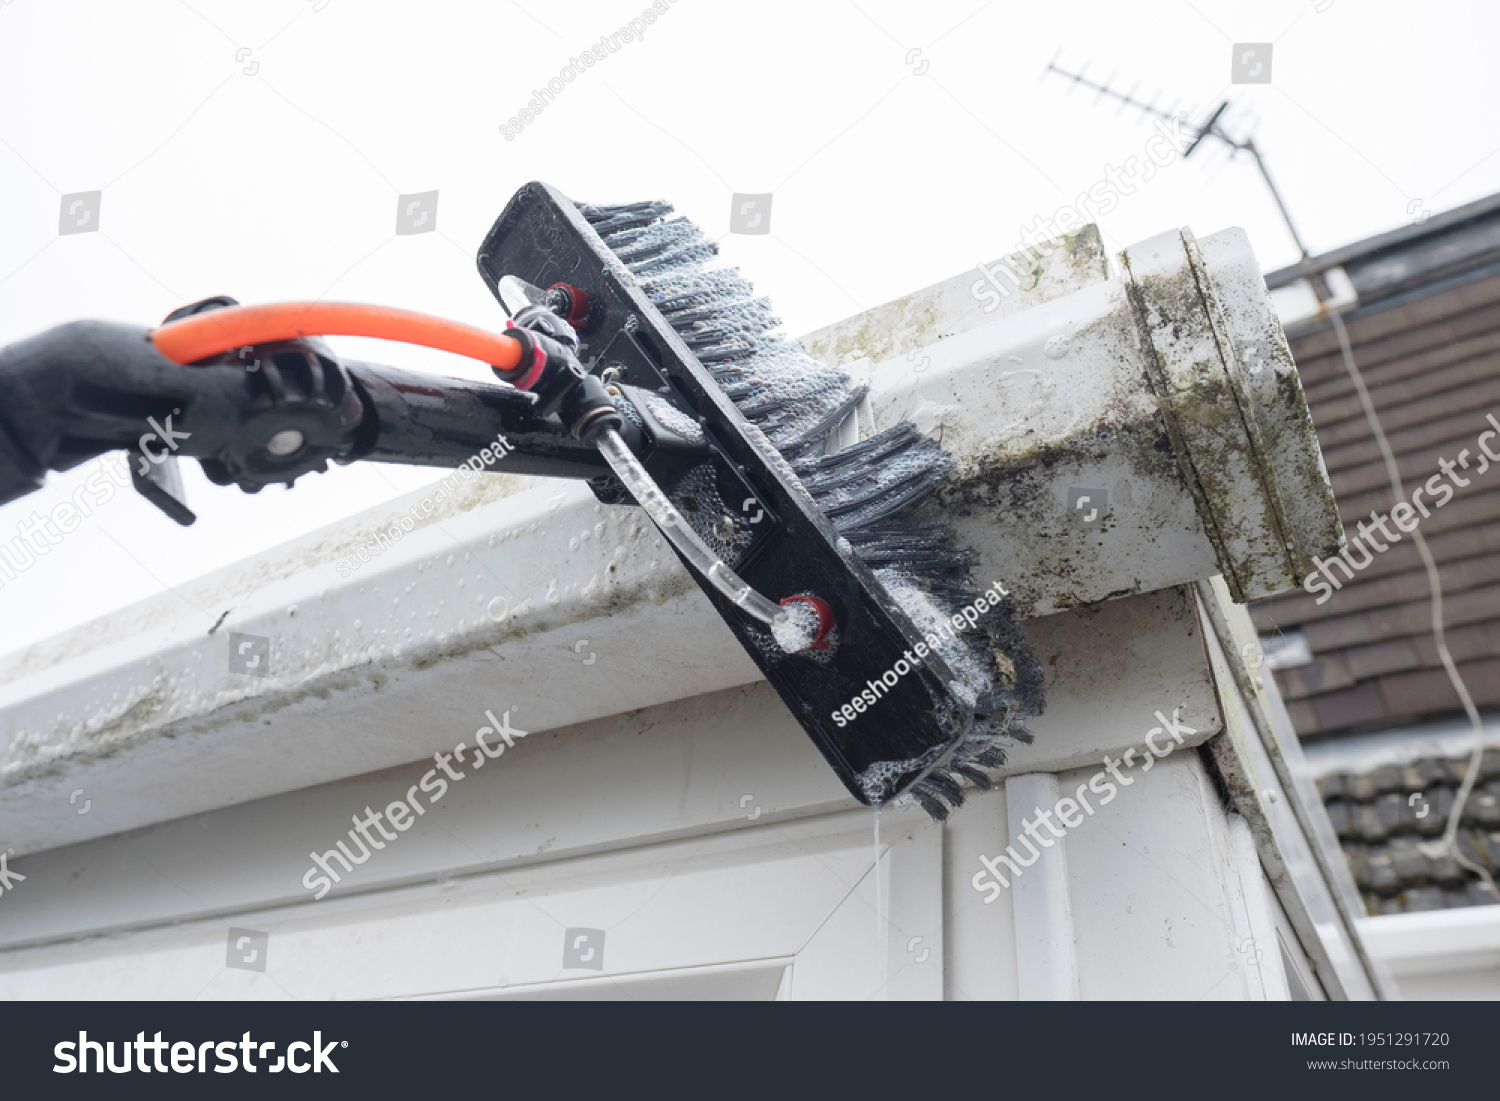 A brush cleaning dirty clogged white plastic pvc gutters and drain pipes with mossy green mould plastic fascias.  Blocked drains and guttering need window cleaners and regular yard work maintenance  #1951291720